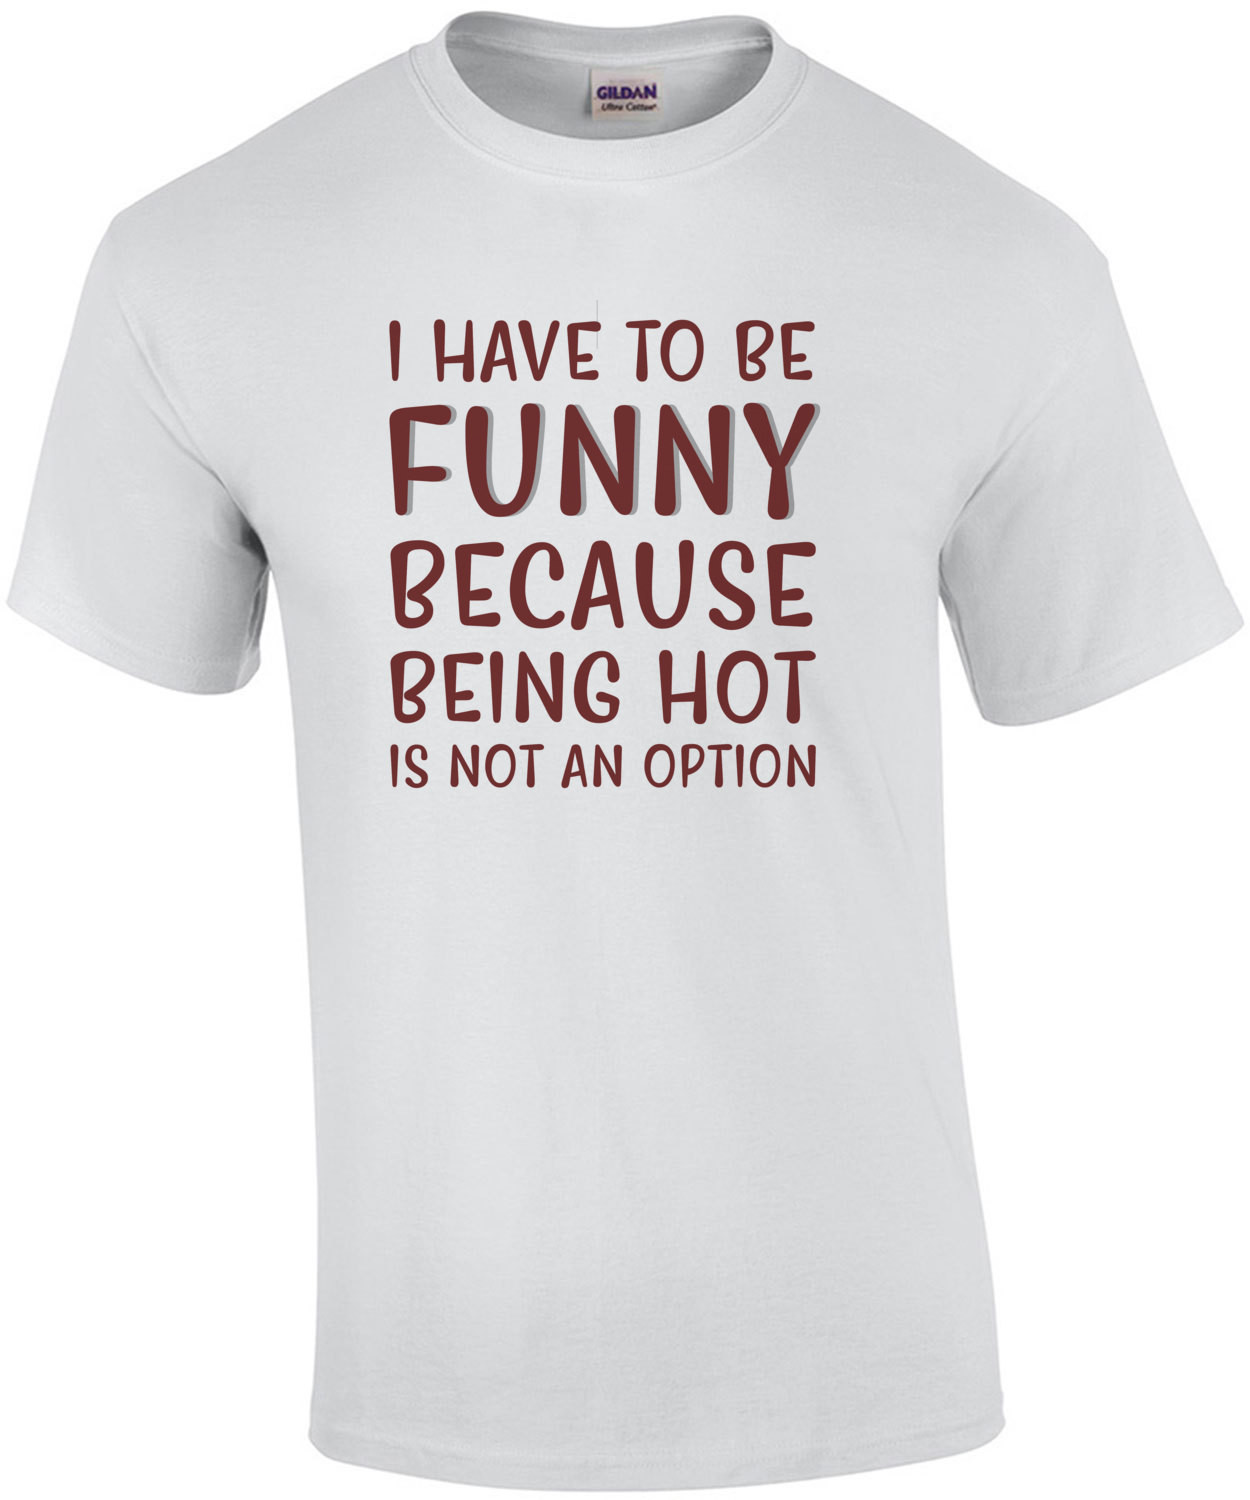 I have to be funny because being hot is not an option - funny t-shirt